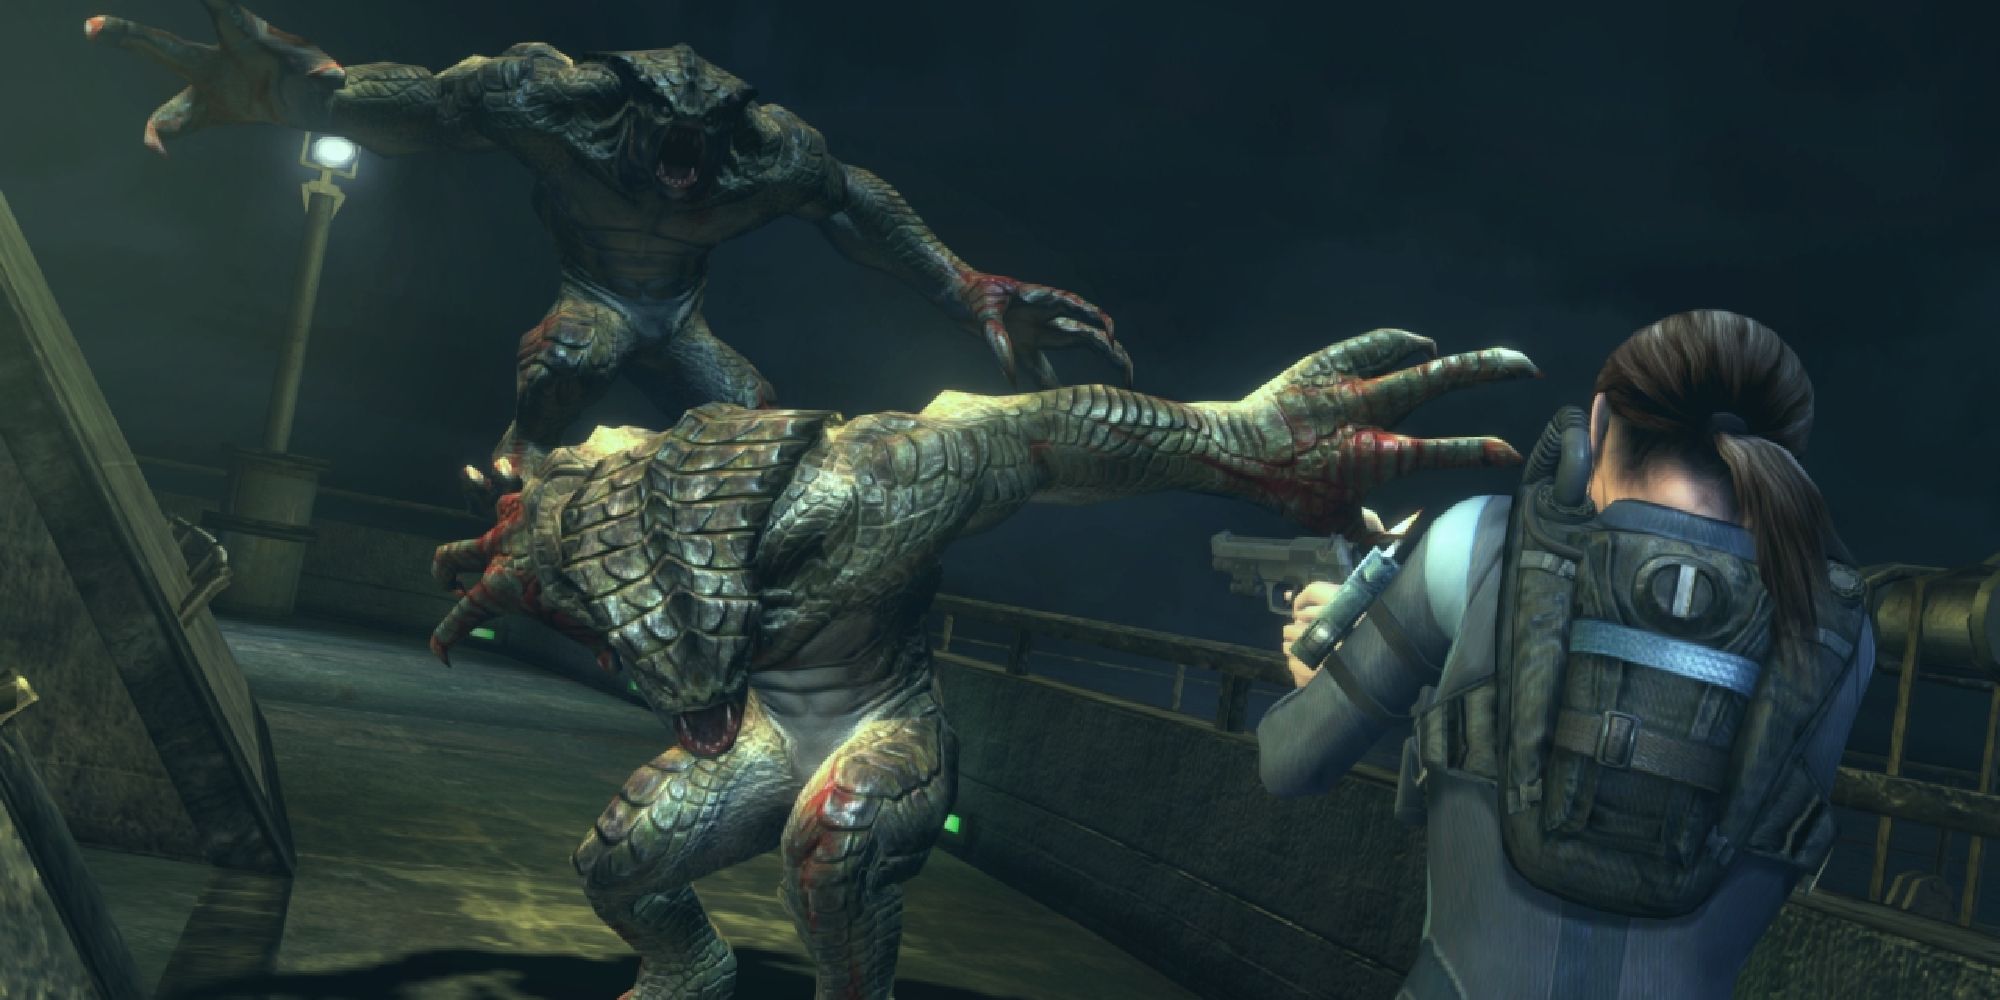 Jill facing off against two hunters, aiming her gun at the closest as a second leaps closer in the background. 